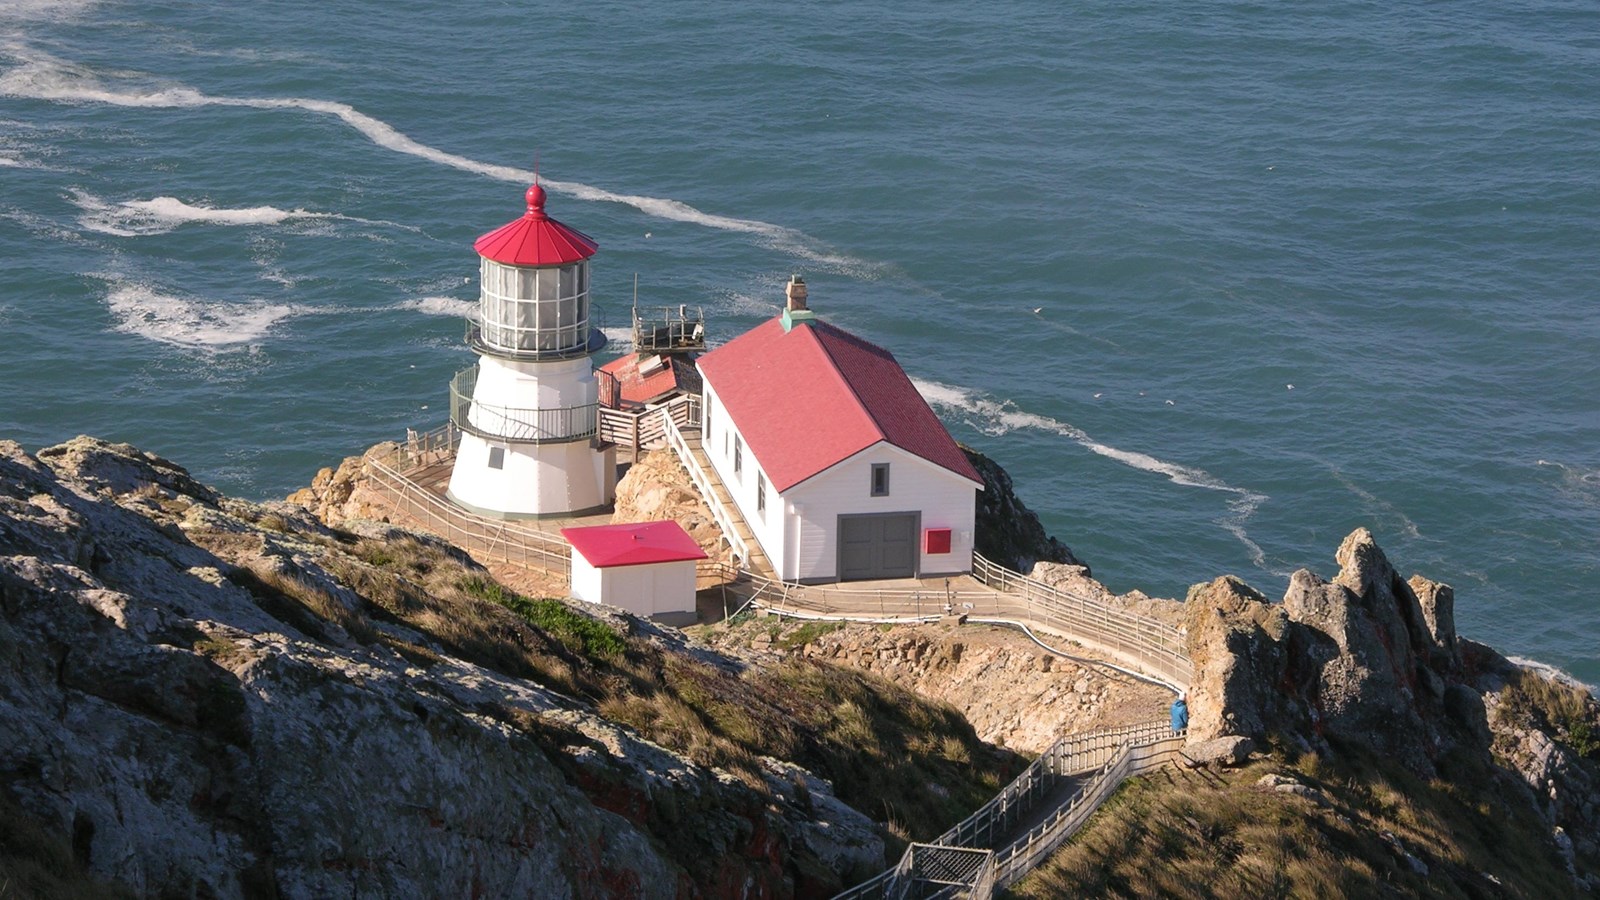 Three short, white-sided, red-roofed buildings sit on a rocky headland above the ocean.